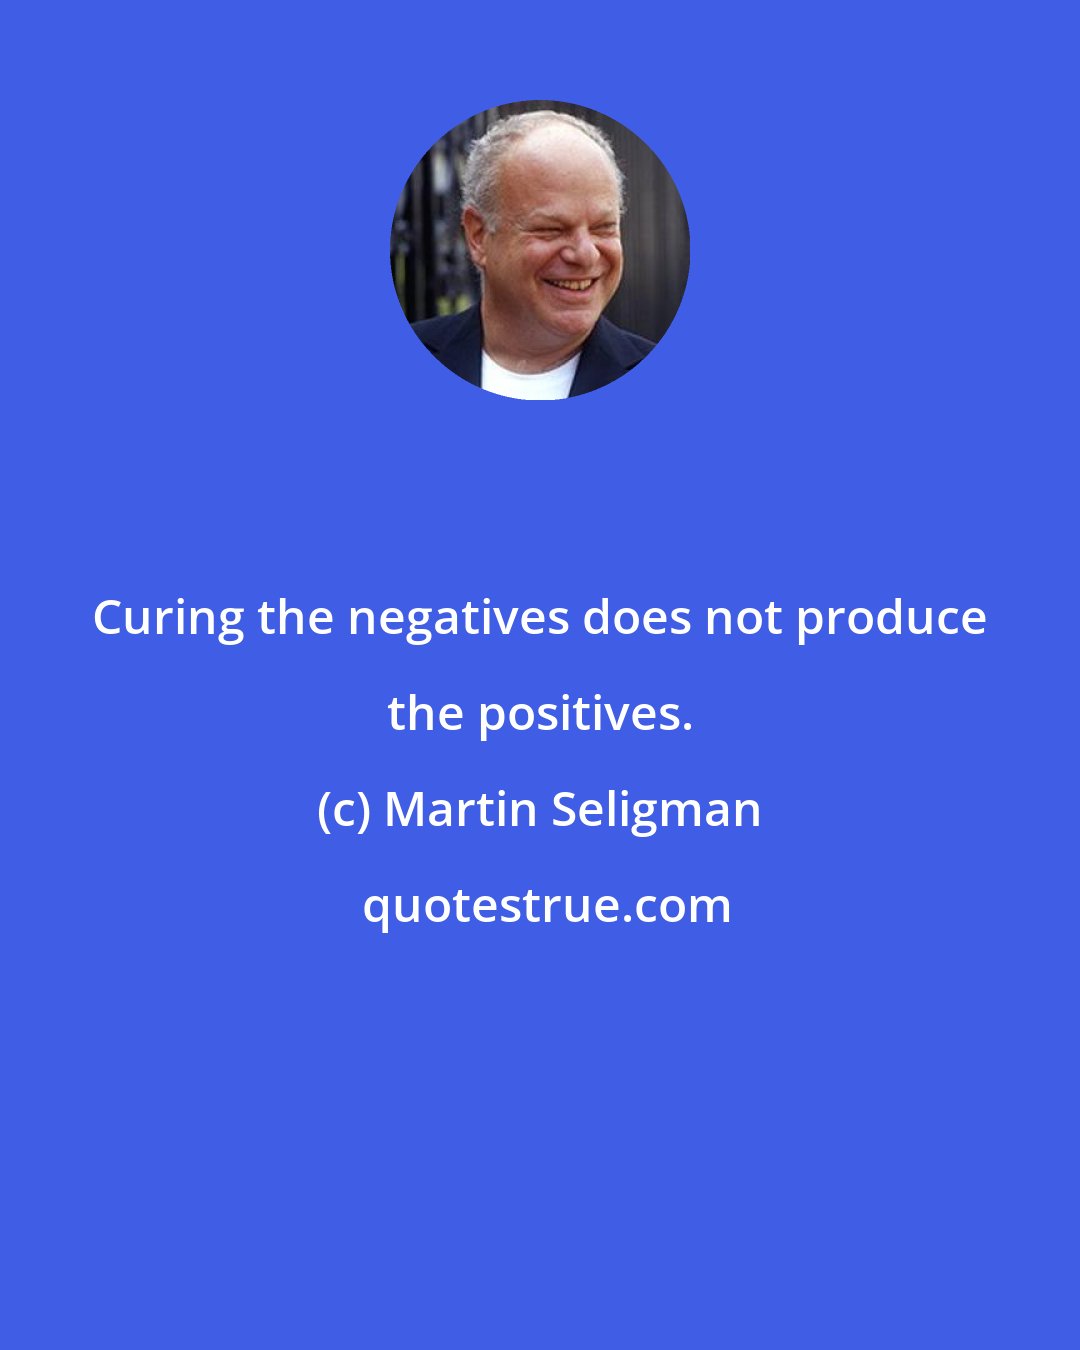 Martin Seligman: Curing the negatives does not produce the positives.